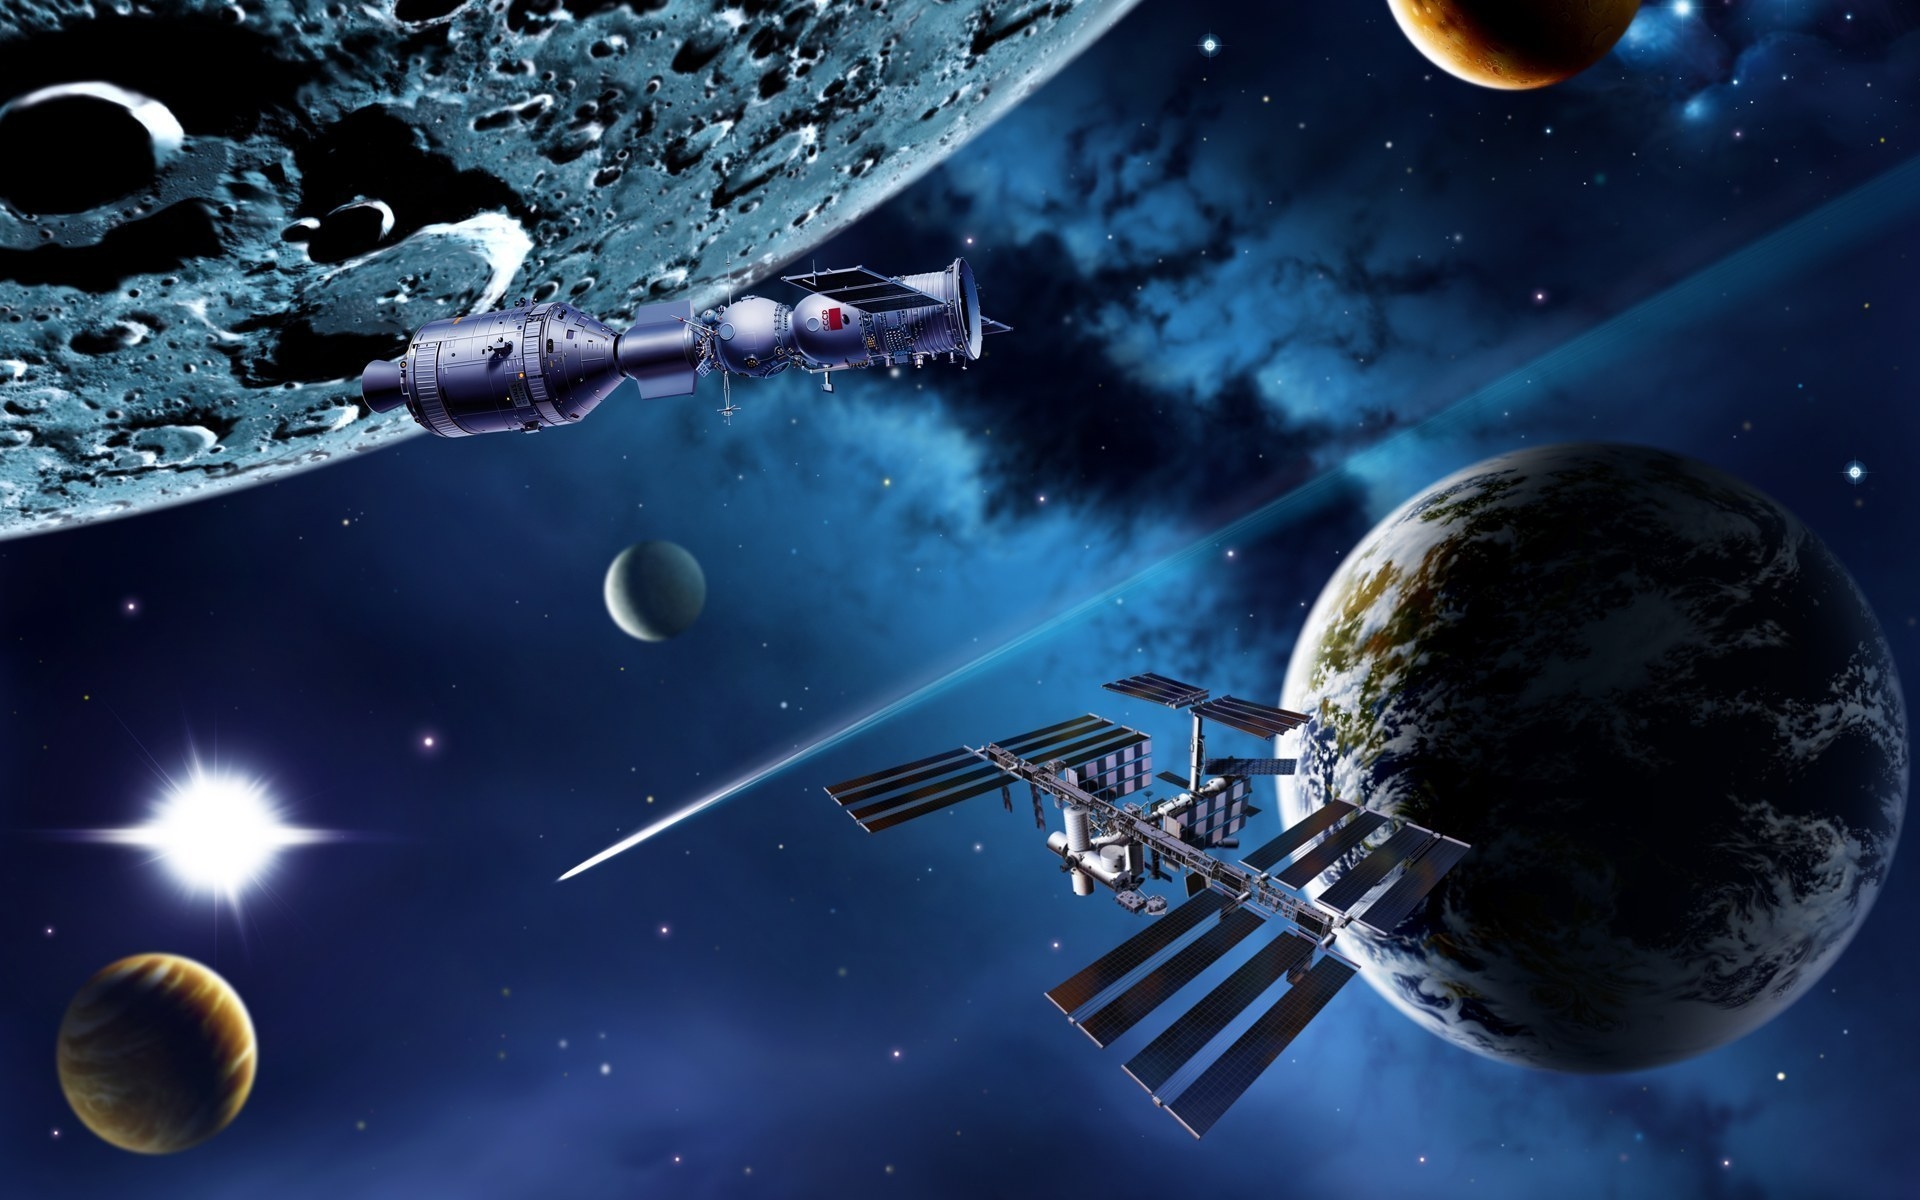 Space Mission Activity for 1920 x 1200 widescreen resolution